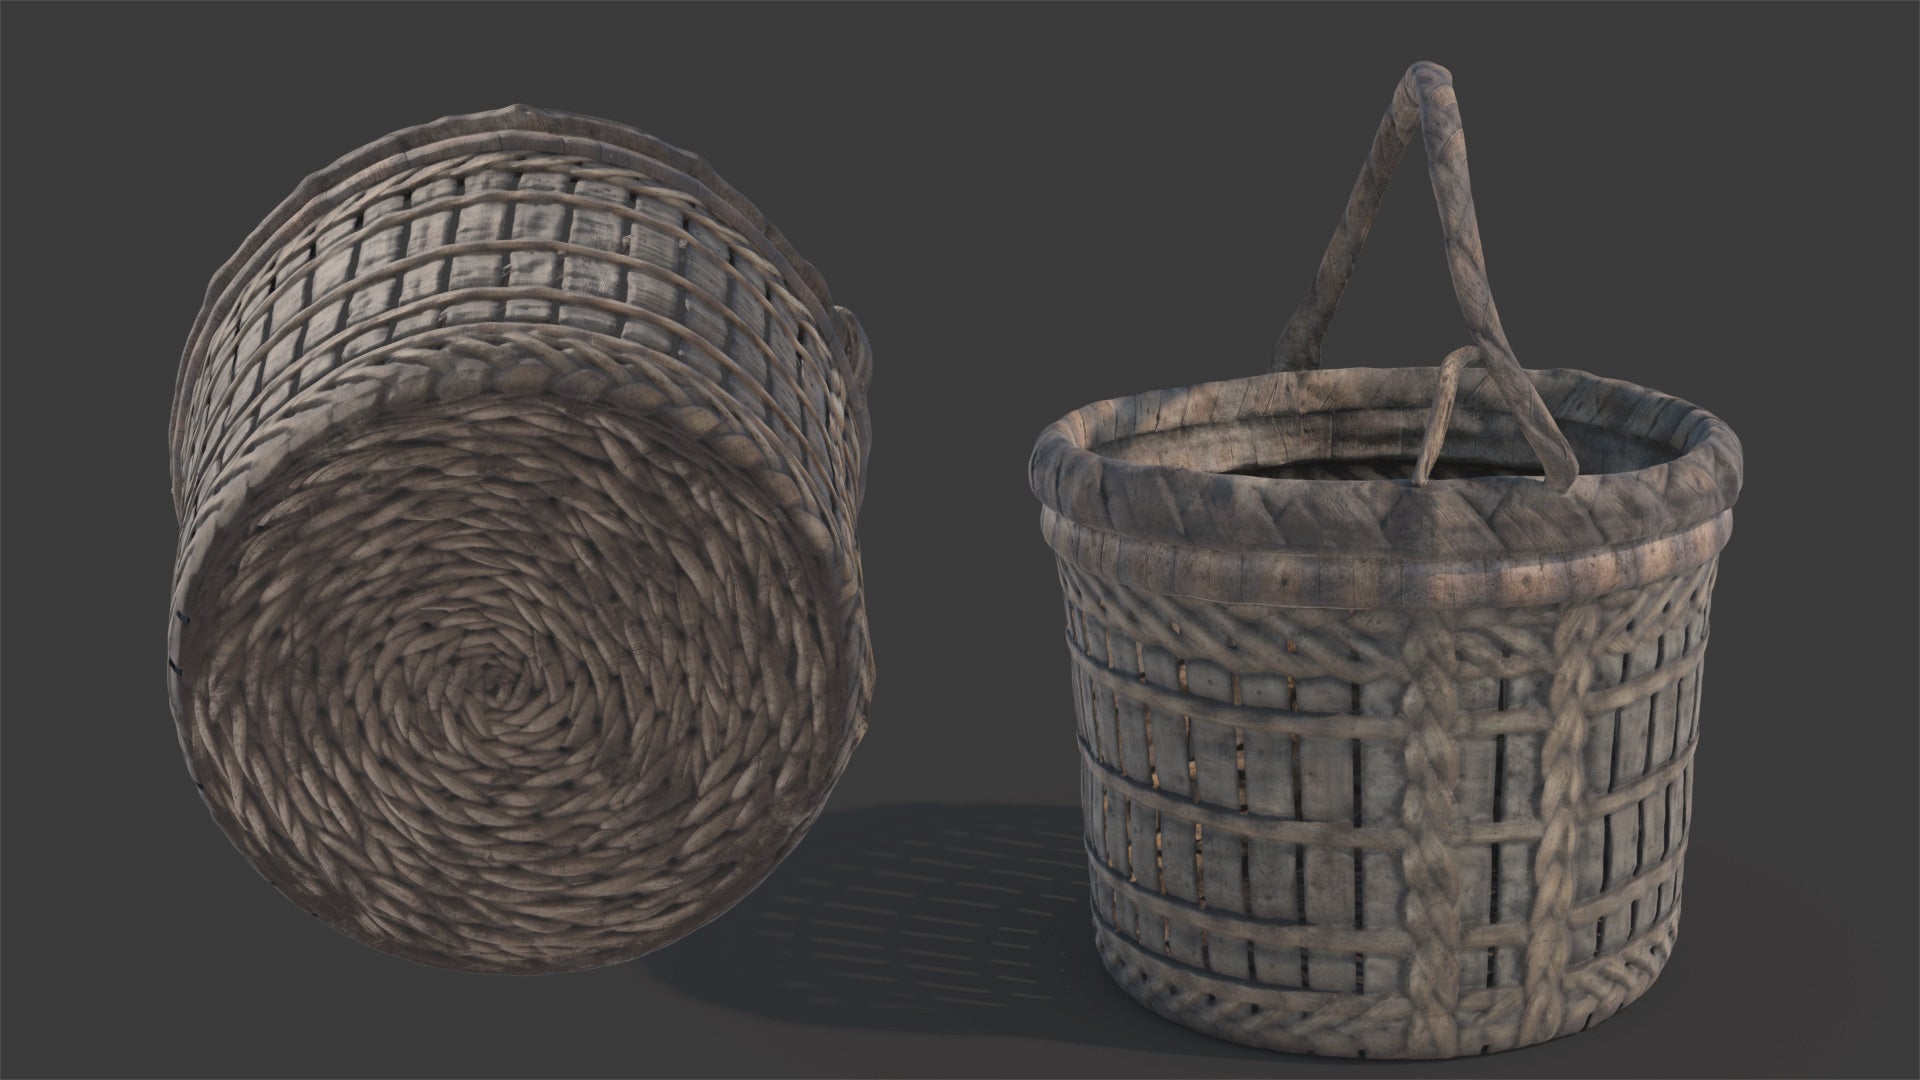 3D model of a rustic, handmade, cylindrical wicker basket with a uneven handle. The views are from the bottom and the side. The model has a small poly count and PBR materials